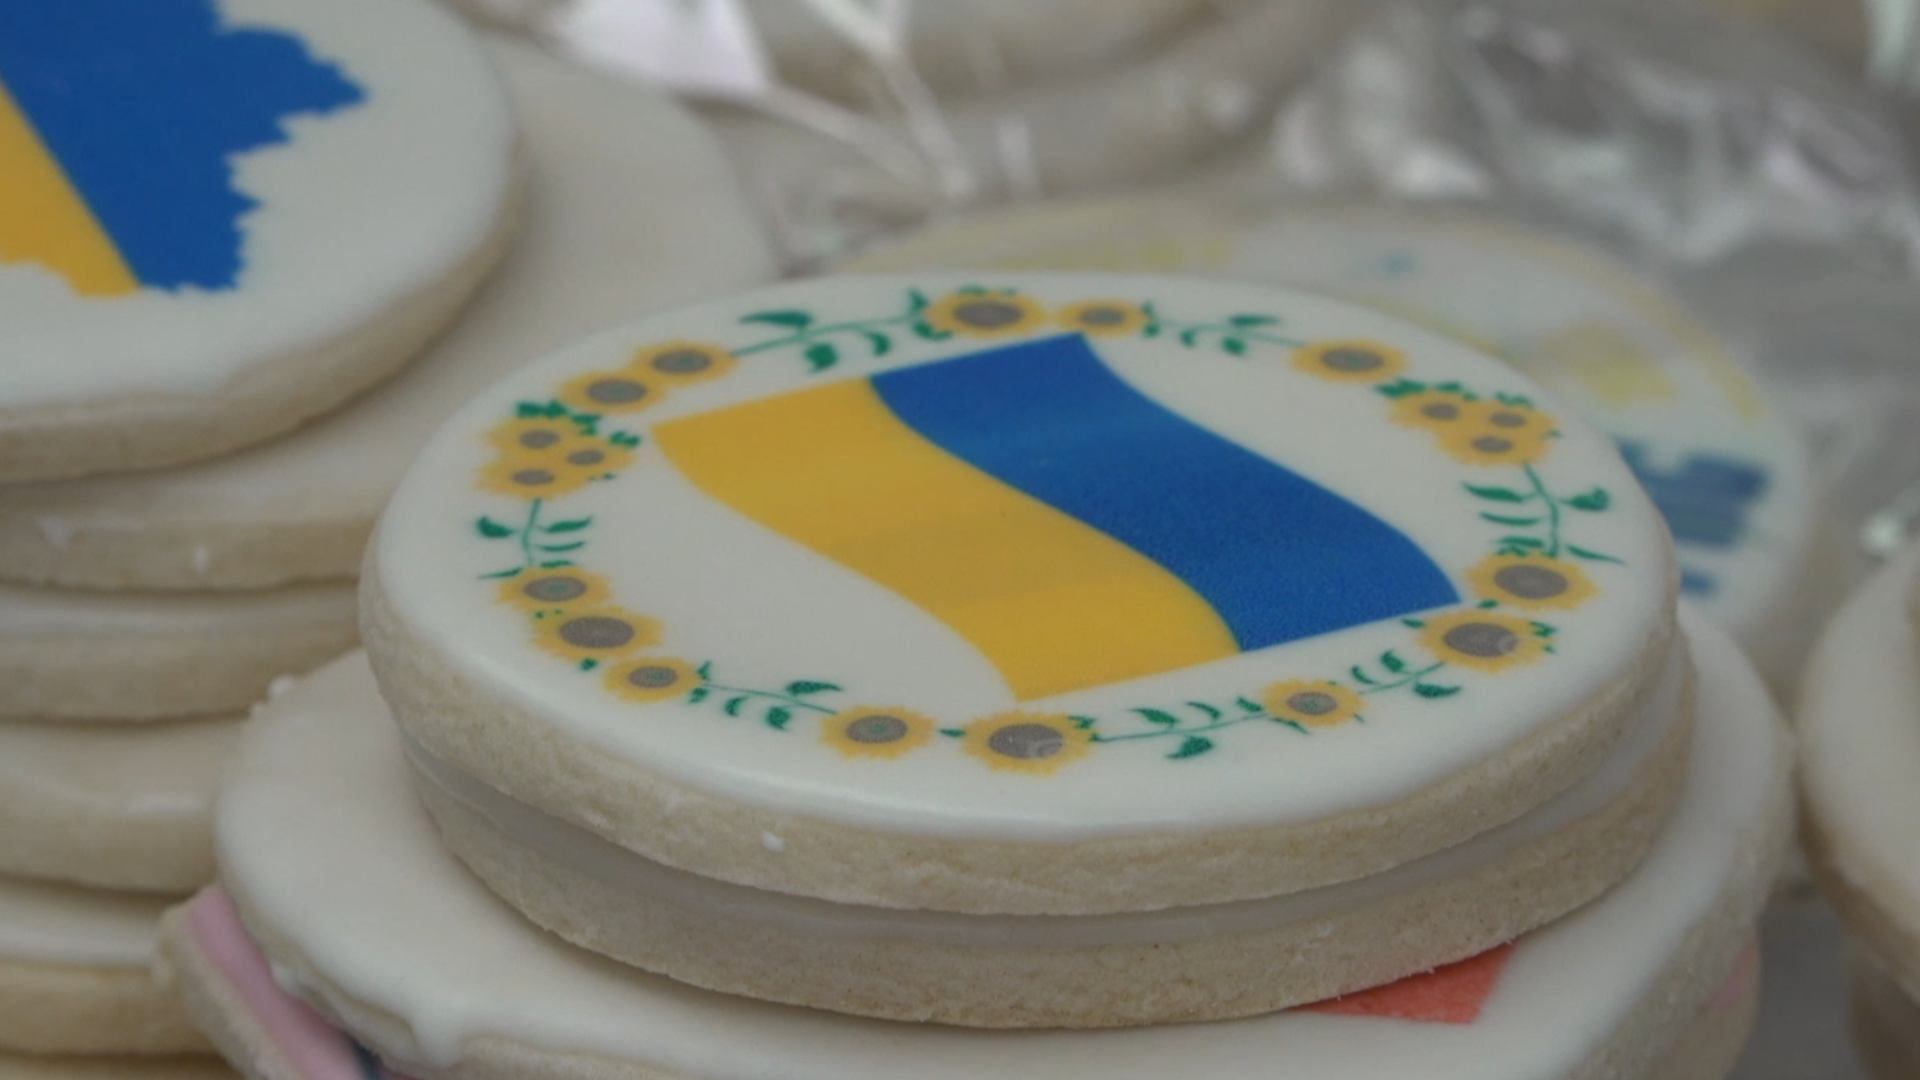 Crumbs Cookies is selling special Ukraine cookies through March, with all proceeds going to benefit Ukrainians displaced by the war.